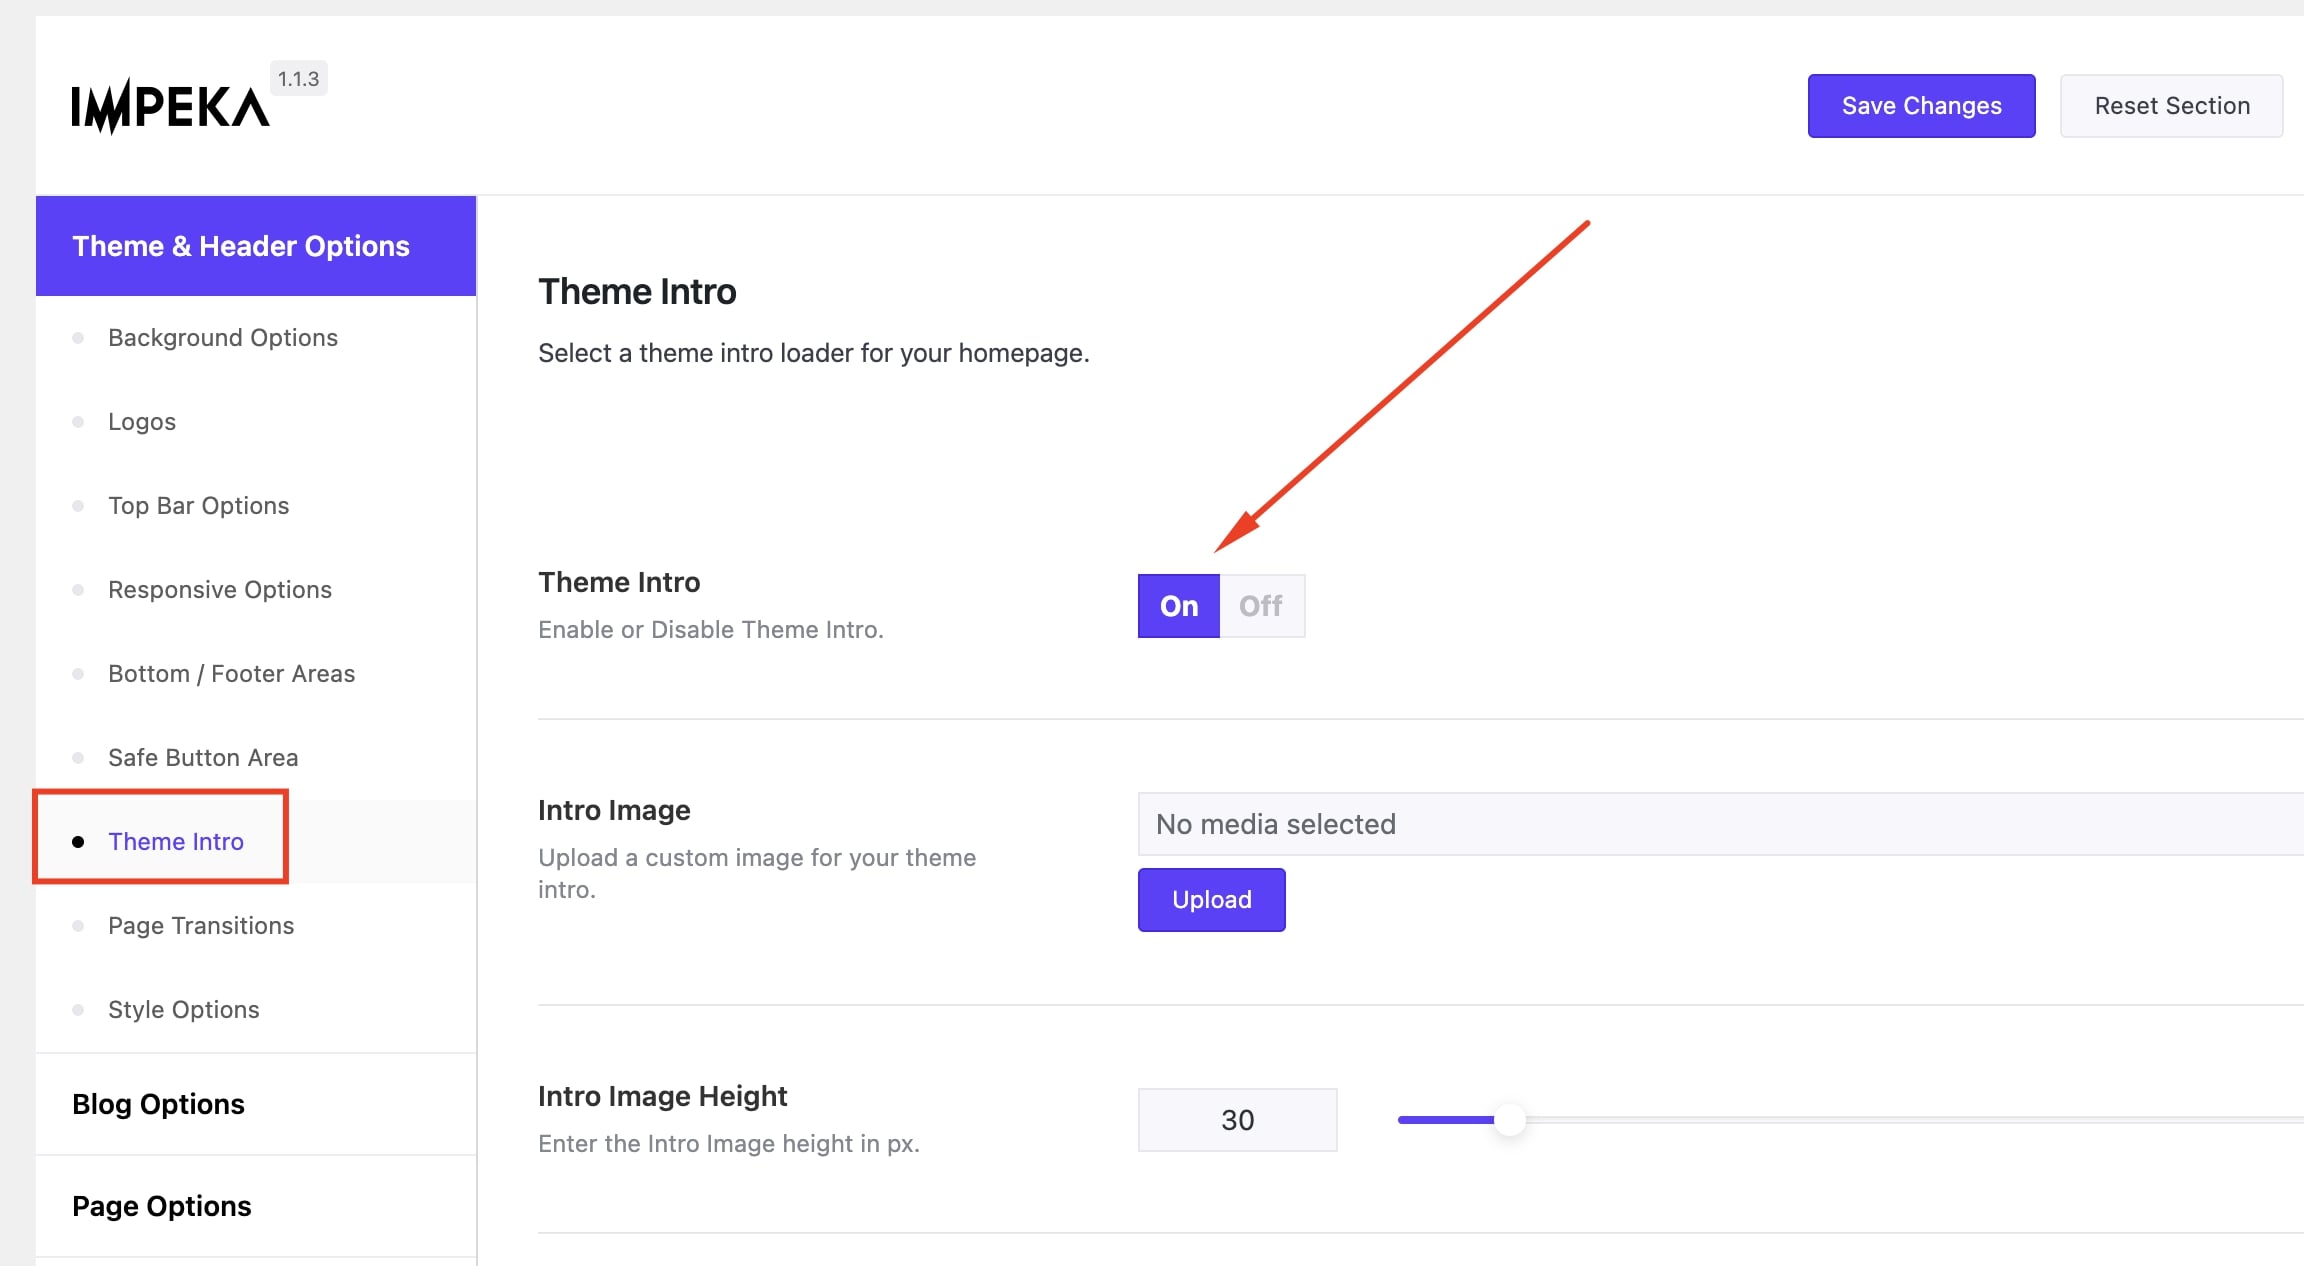 Theme Intro Loader in Impeka